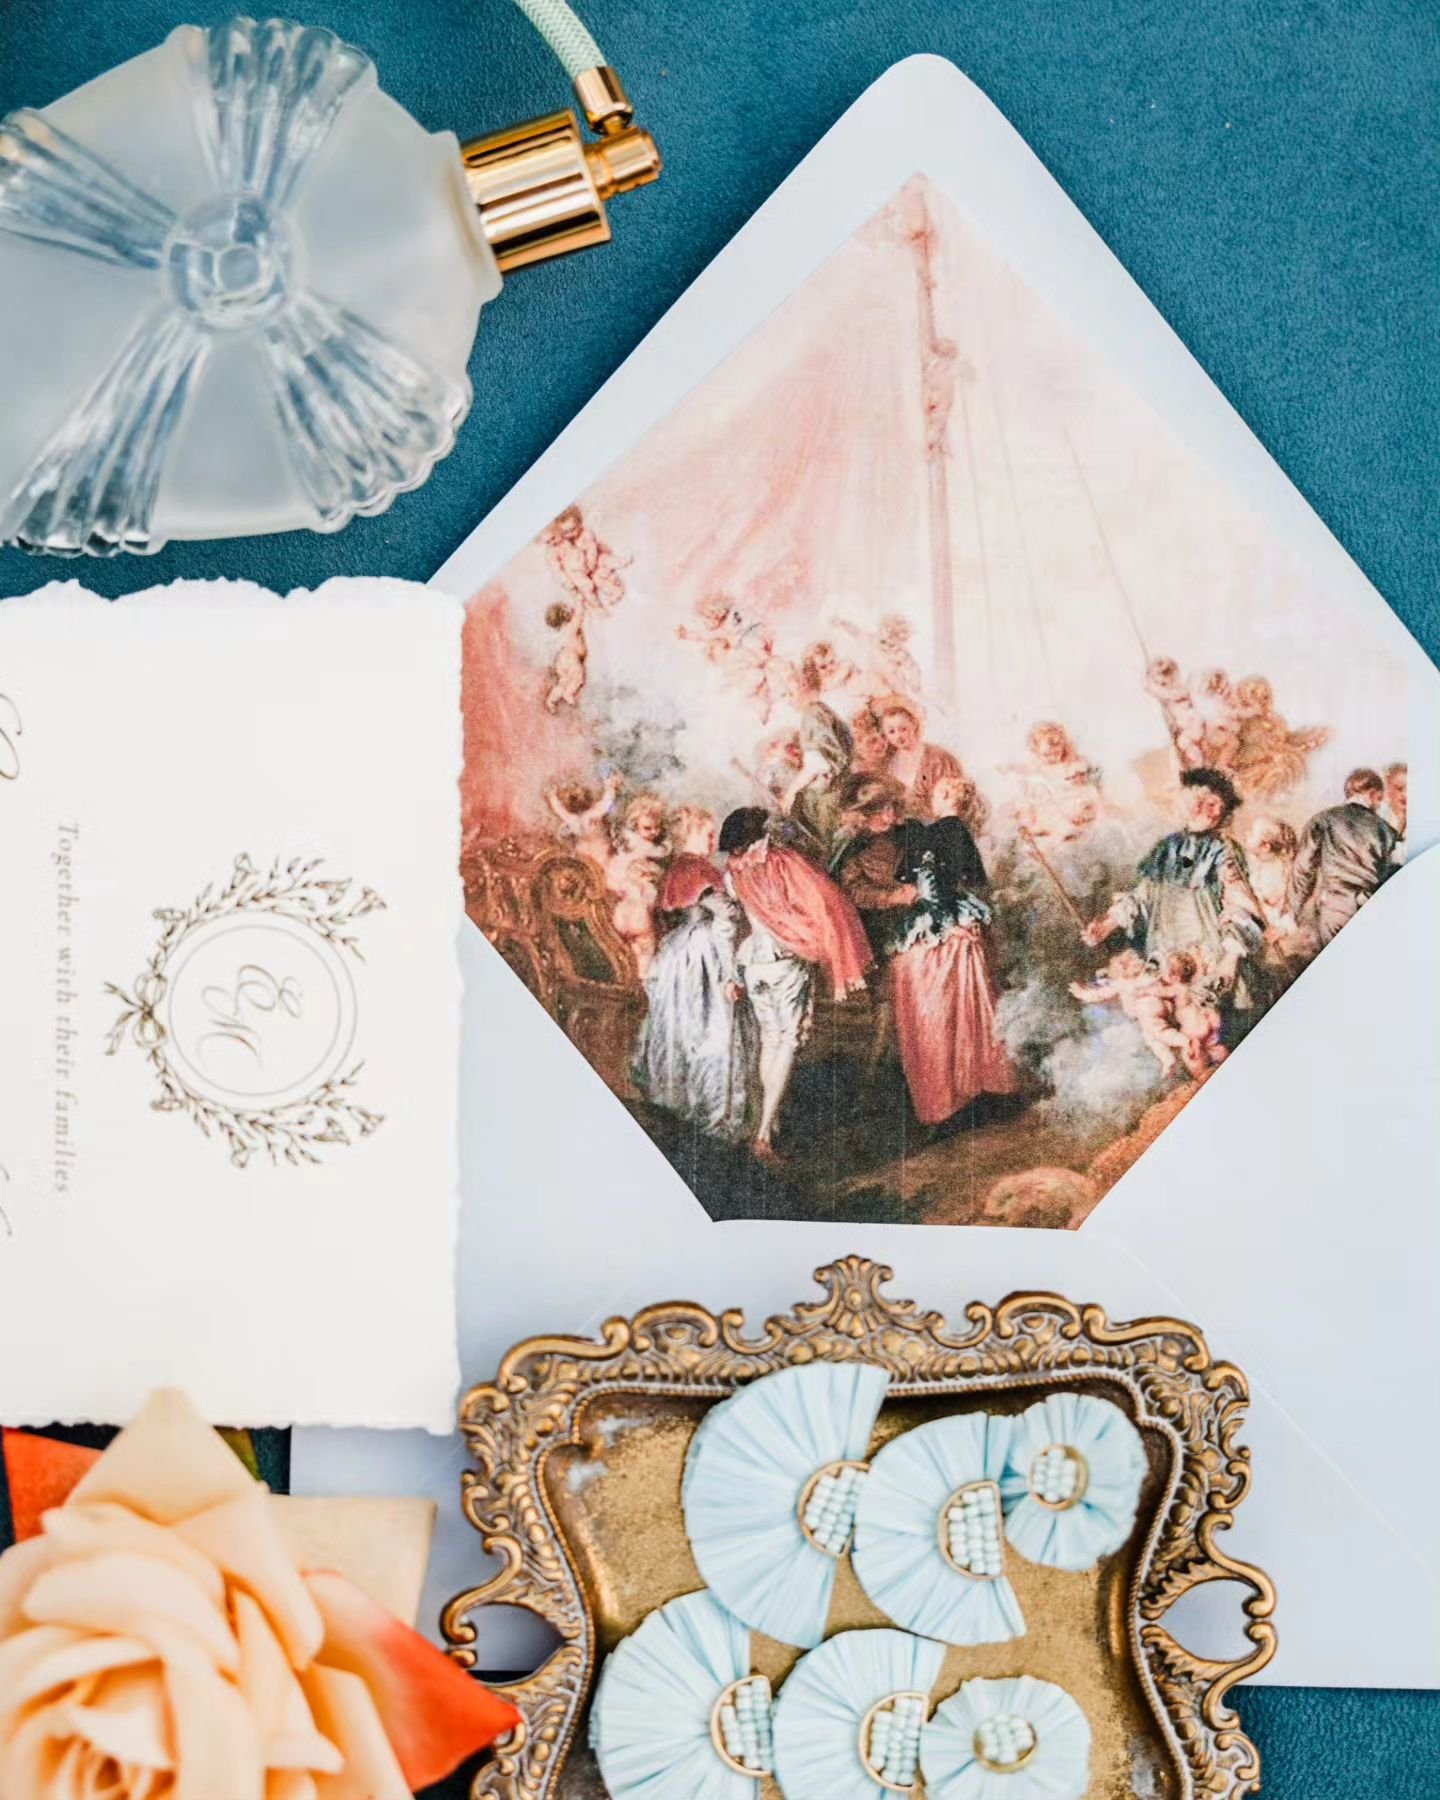 Such beautiful wedding invitation suite details! 

Vendors: 
Venue: Goodstone Inn &amp; Restaurant
Planner: Bellewether Events 
Host: Jenna Leigh Photography
Florist: Form &amp; Fire
Hair &amp; Makeup: The Stylist Abroad
Rentals: Select Event Group
C